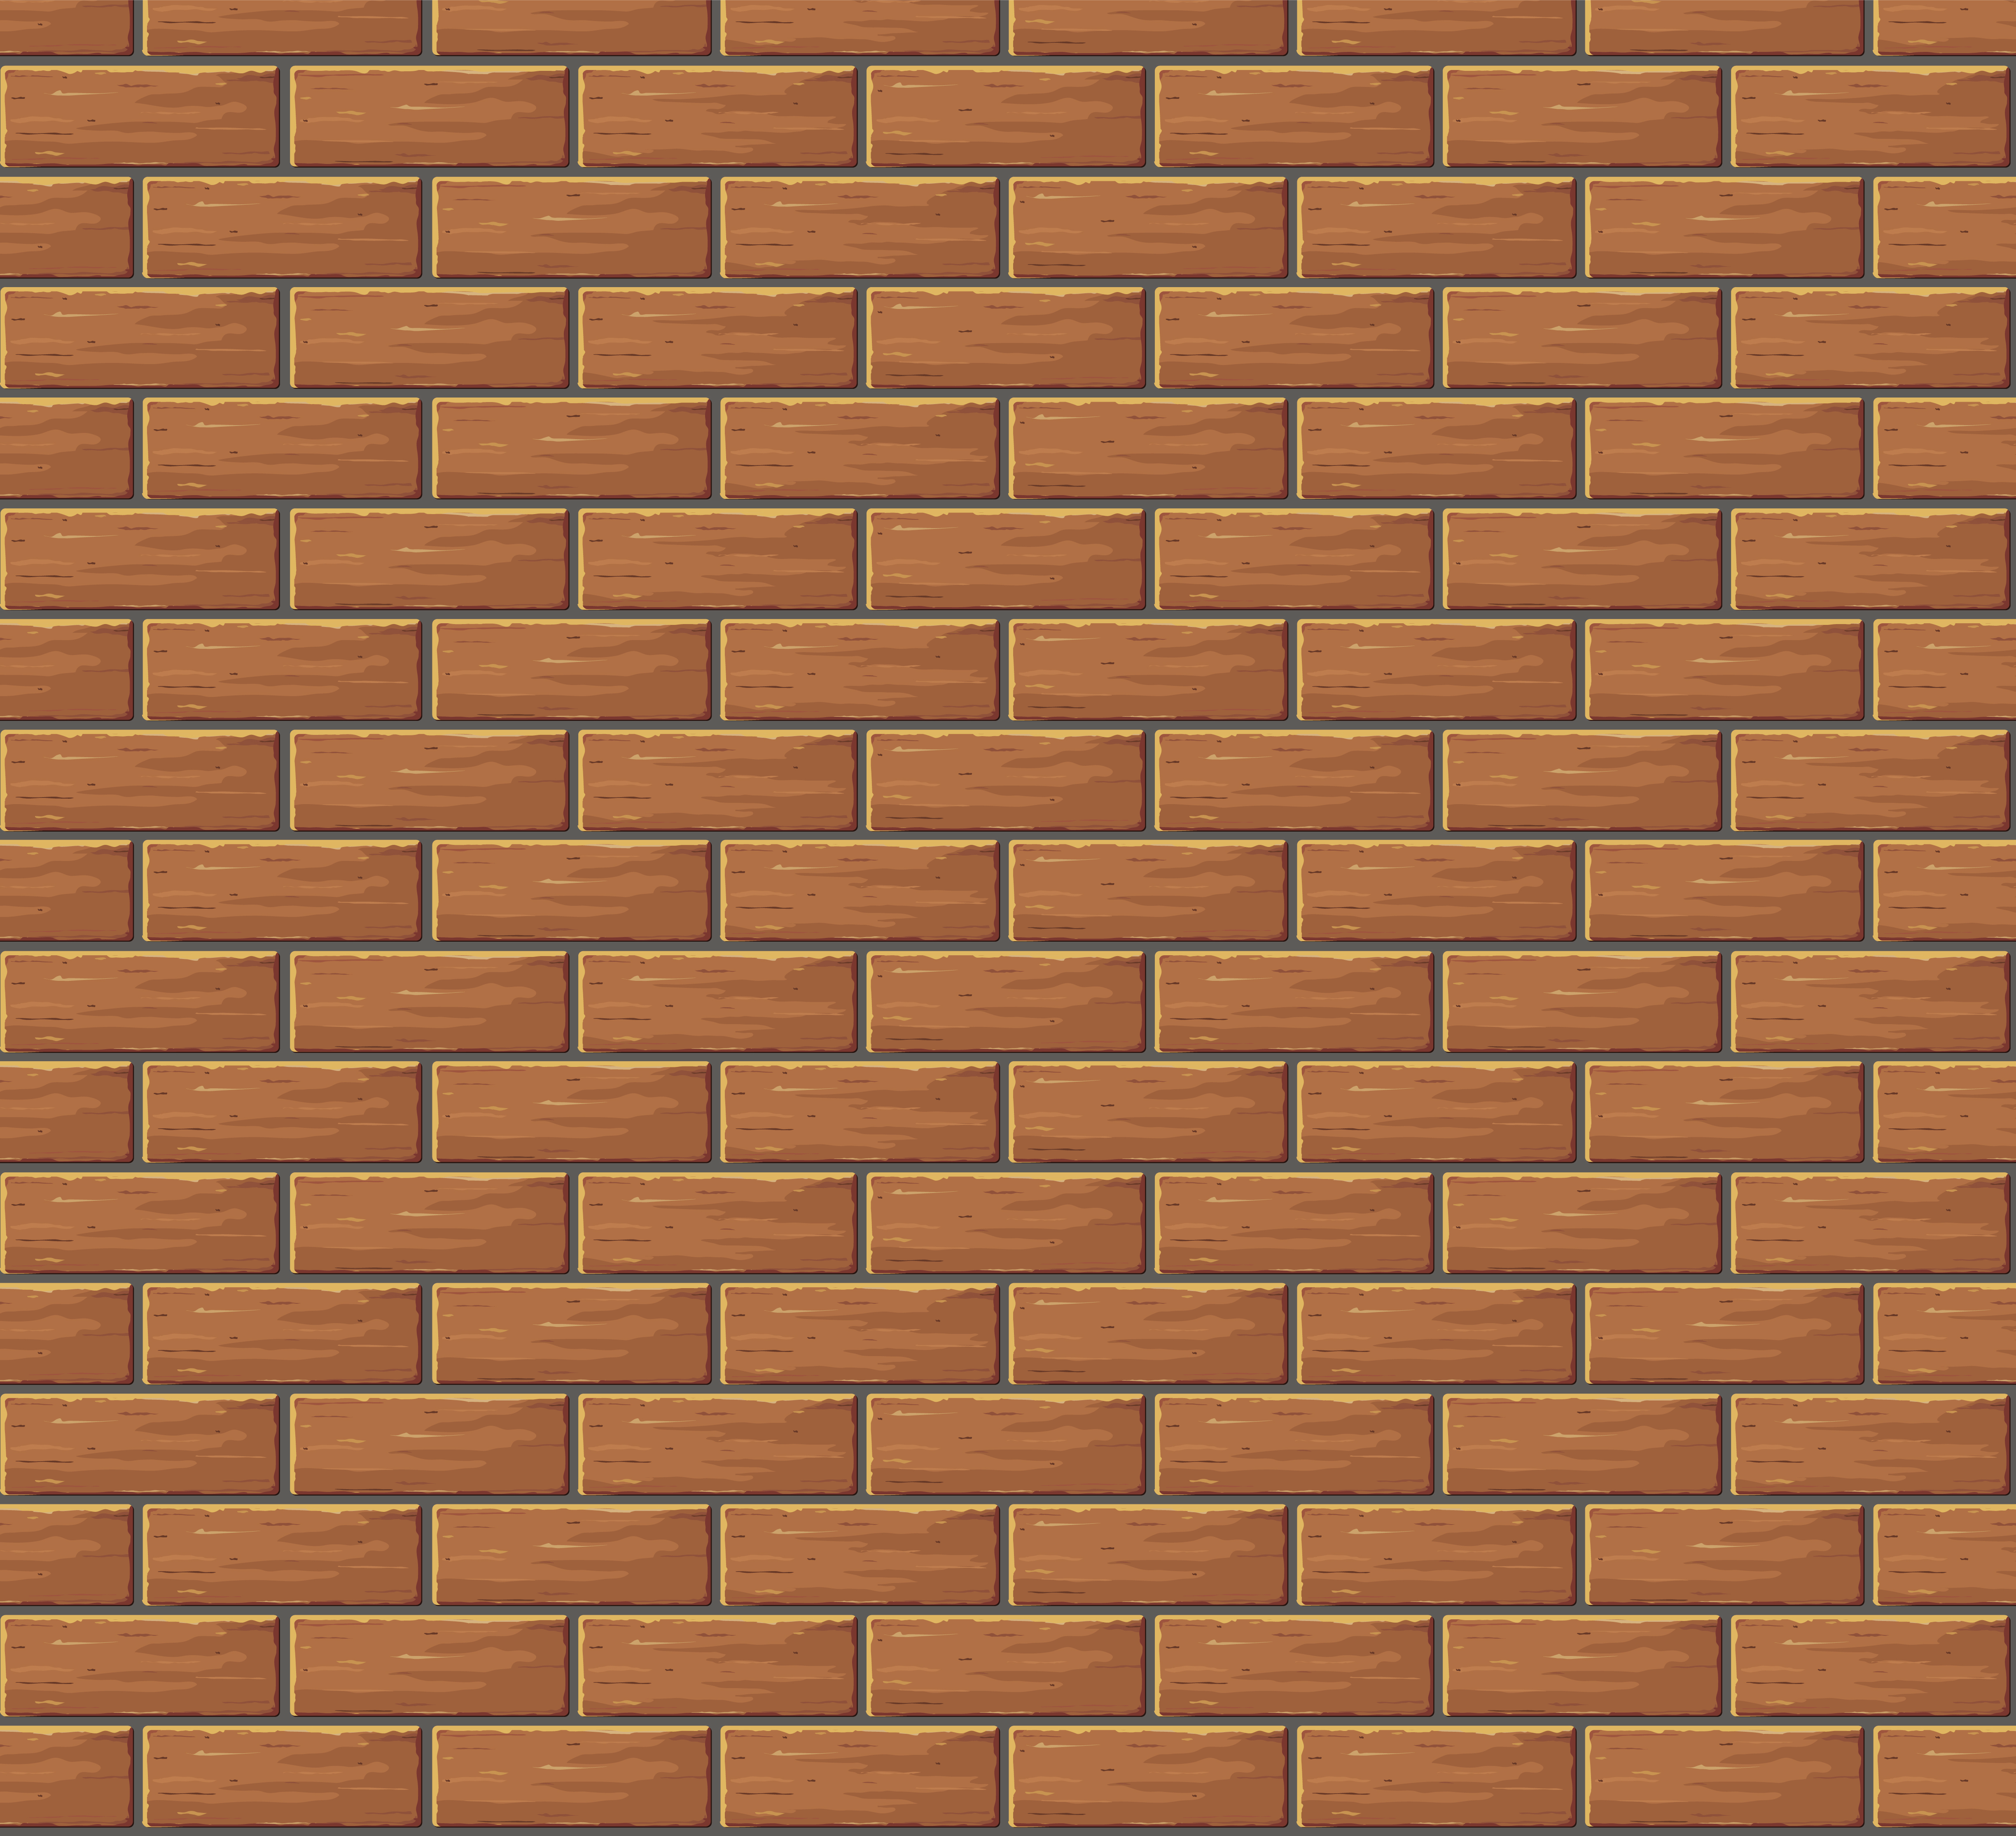 Brick_Wall_Background.png?m=1399676400 